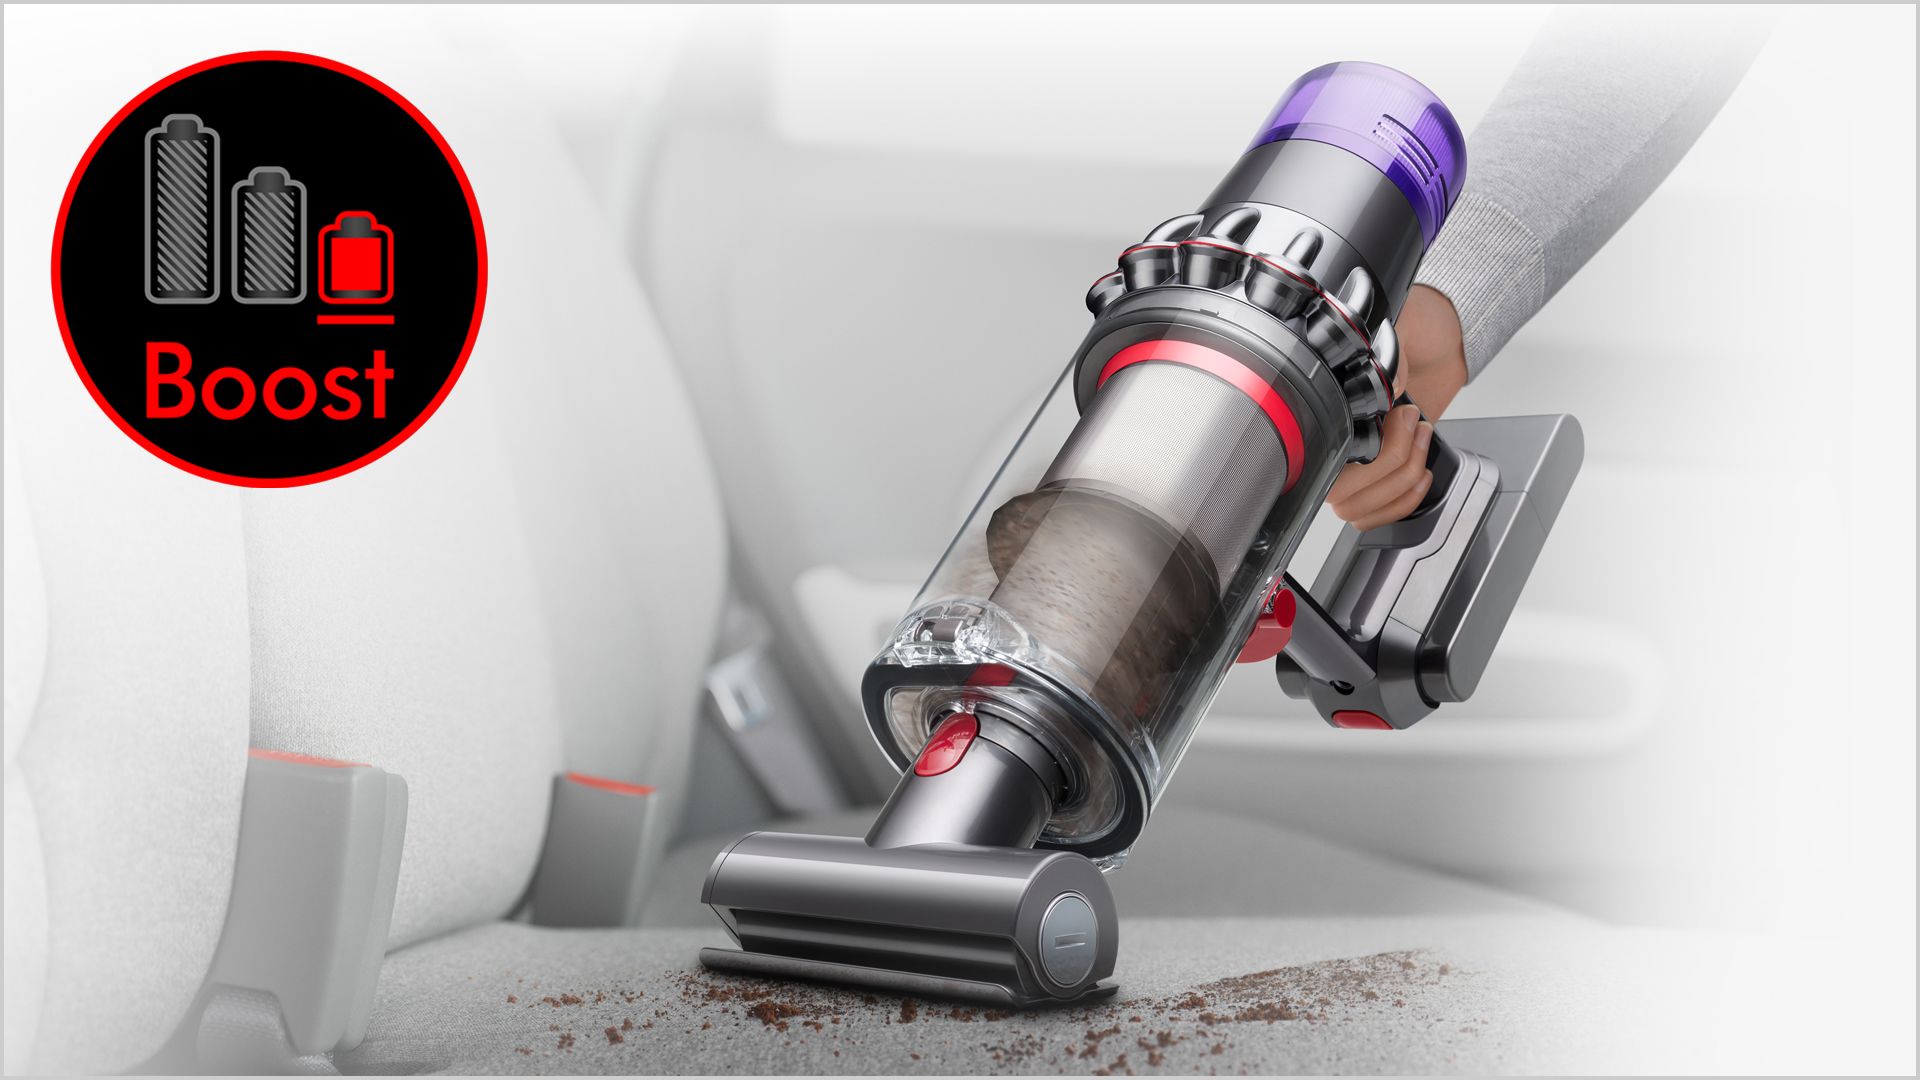 Dyson V11™ Cordless Vacuum Cleaner, Overview